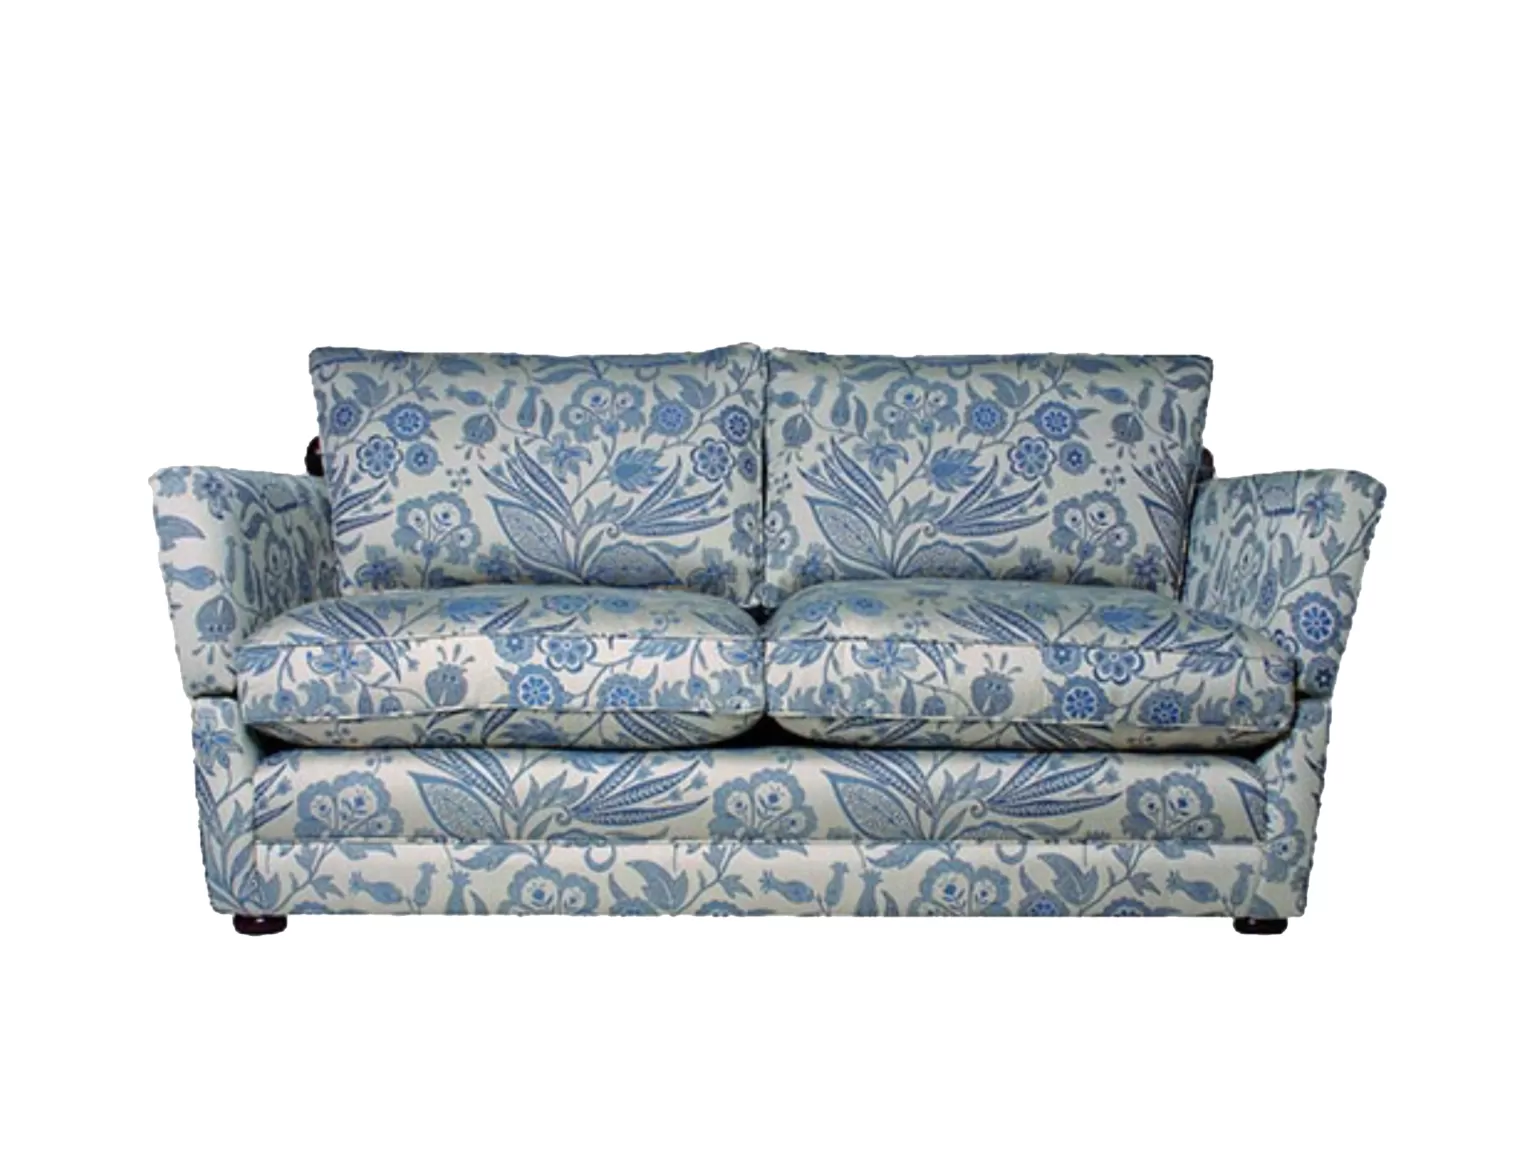 A well known and different style of sofa. The Knowle is best known for its drop down arms, and acorns. Our Knowle sofa has the added comfort of back high back cushions, making this a very comfortable sofa to sit in. The accessories available for The Knowle are hand picked by the customer, to finalise their finished look.
